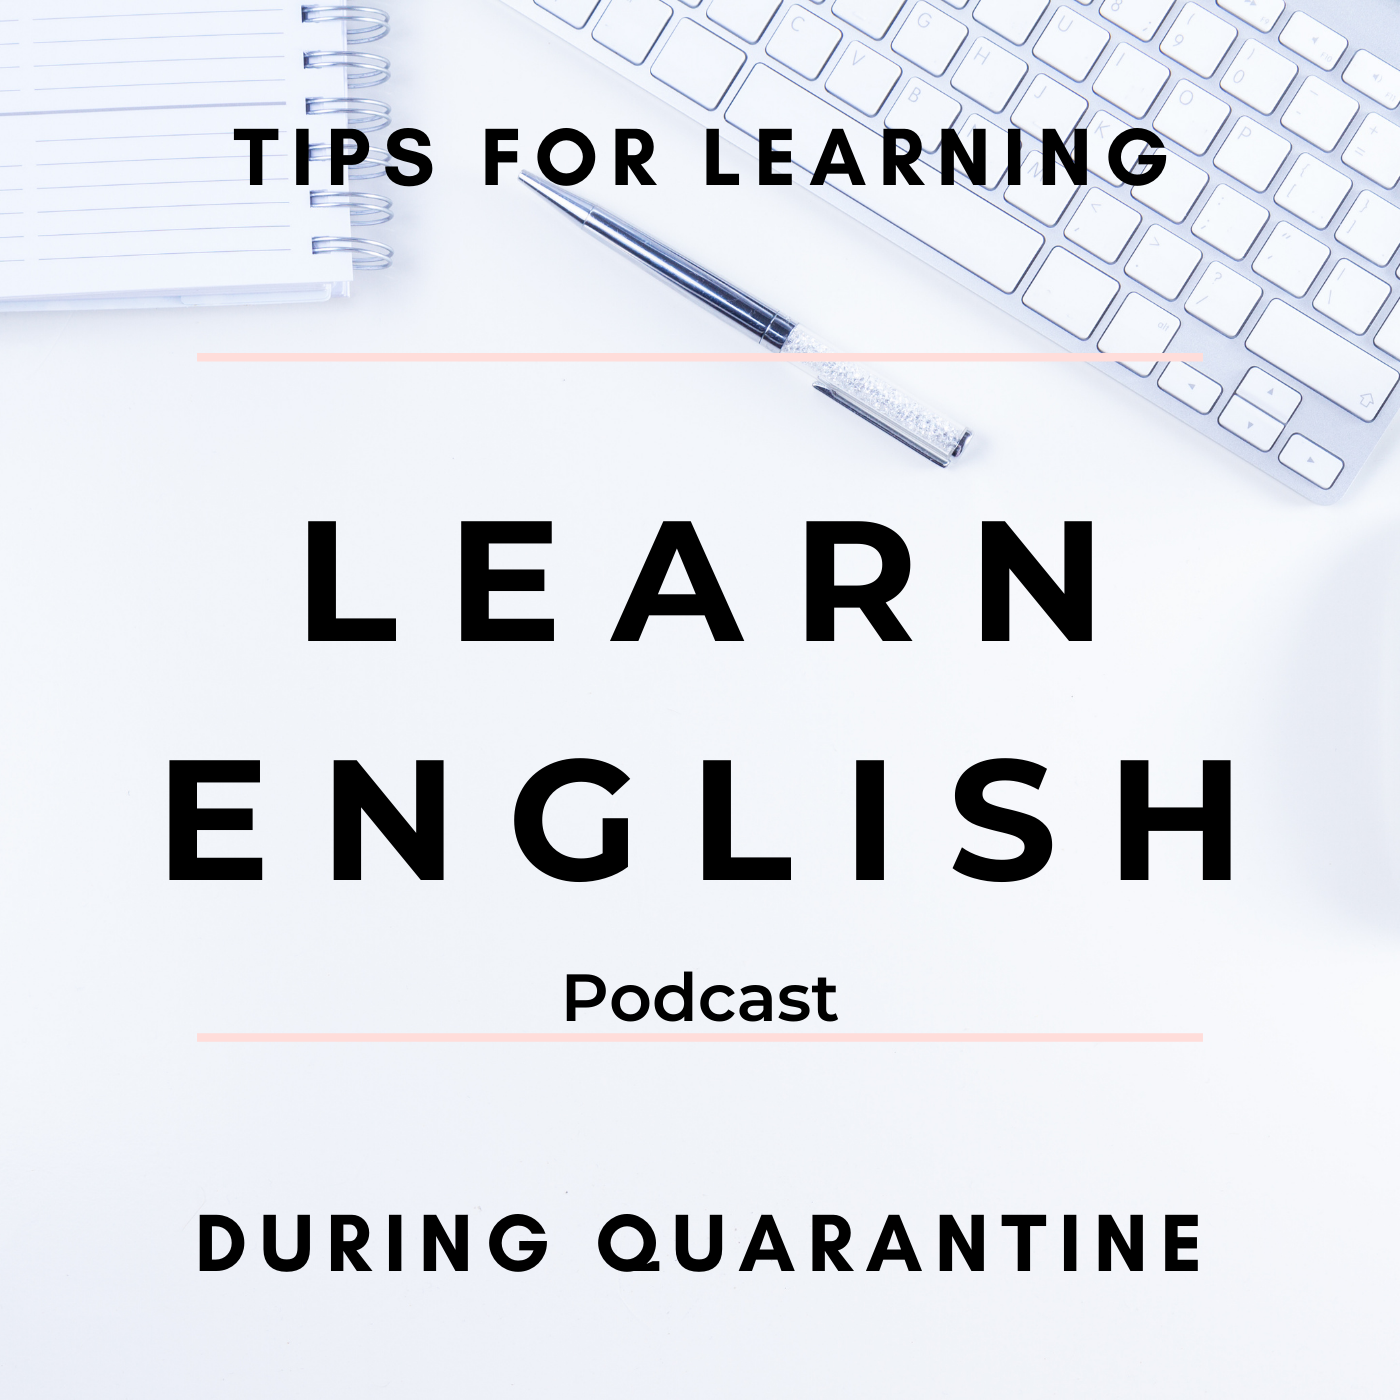 Learn English Podcast: Tips for learning during quarantine (Minea Season 1, Episode 5)